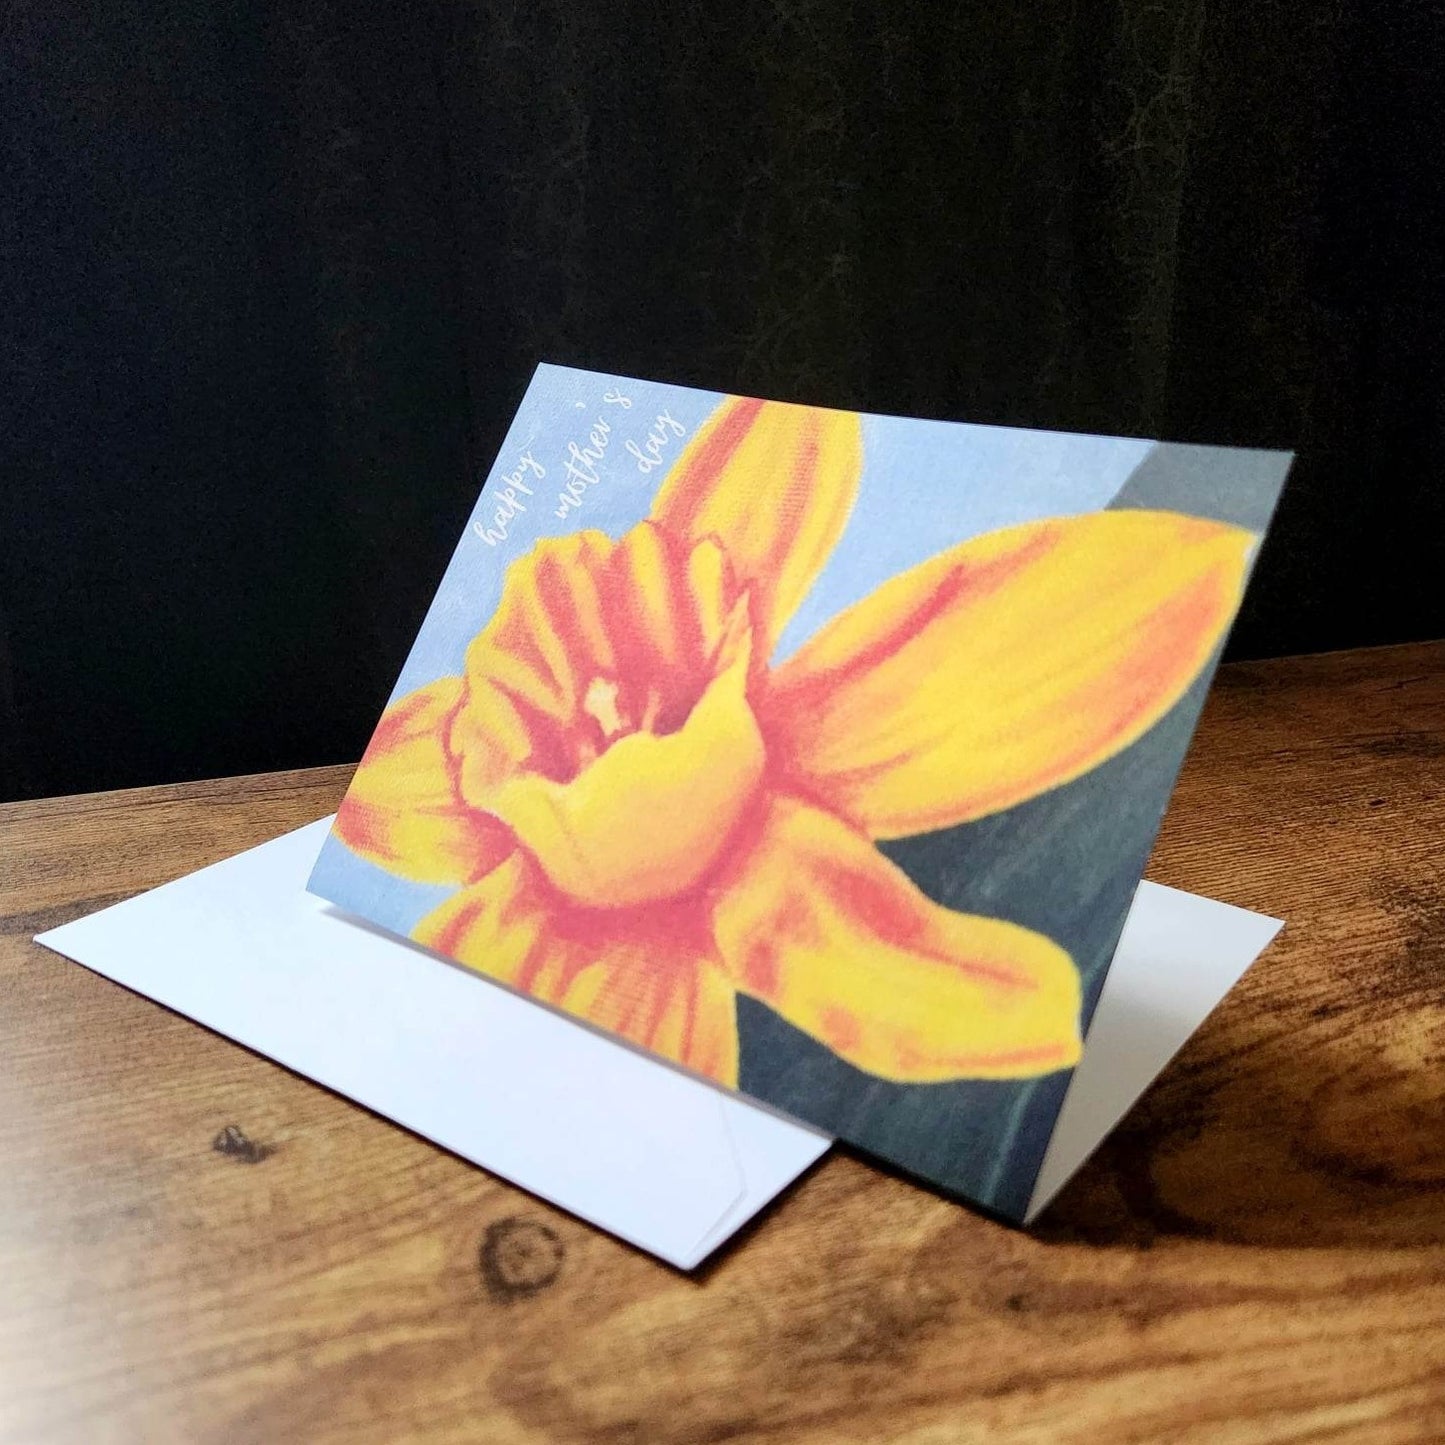 Daffodil mother's day card, Original art card for mom, Daffodil card, Mother's day greeting card, Celebrate mom card, Happy Mother's day mom